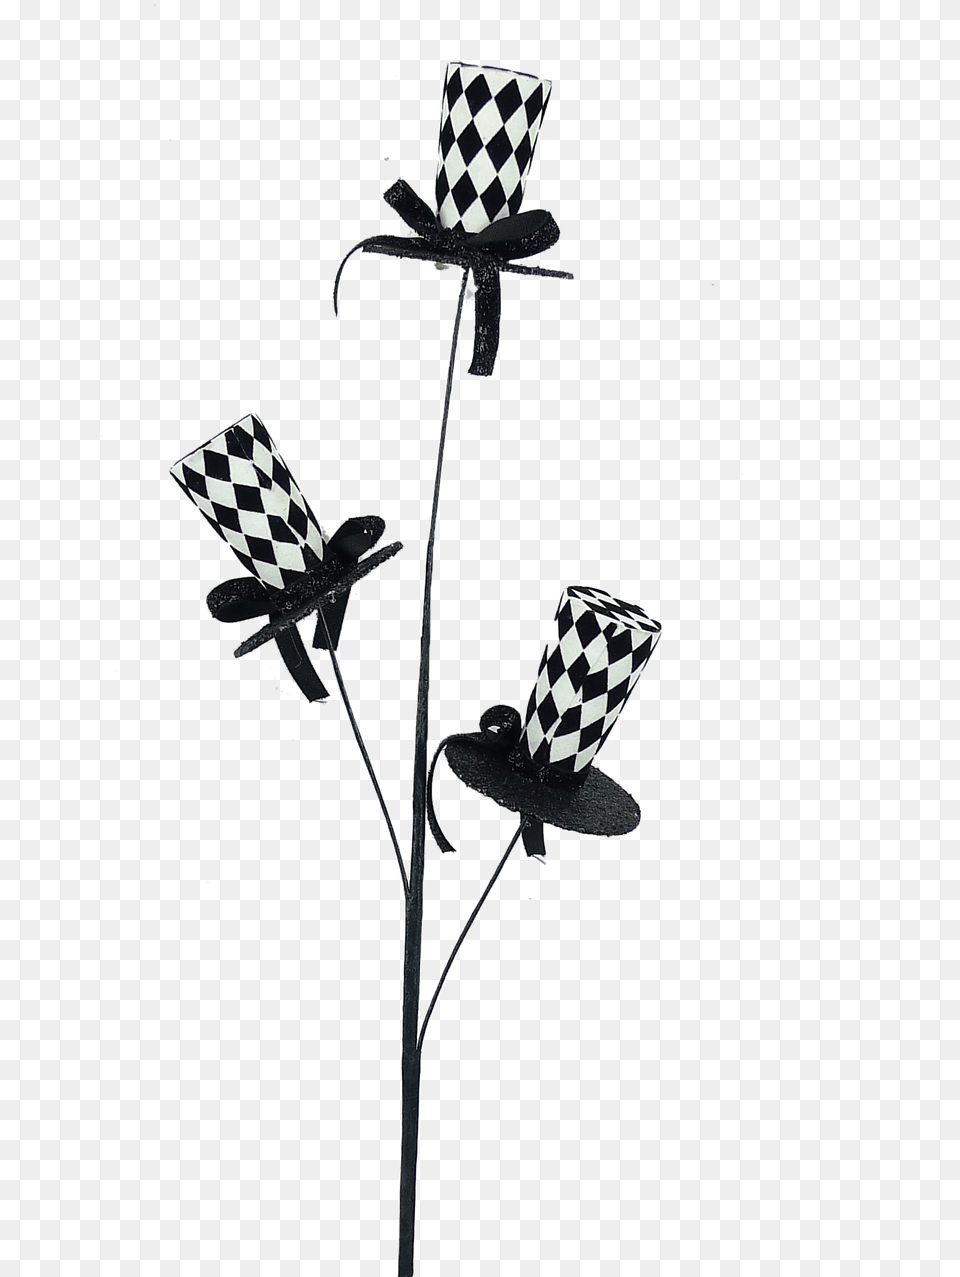 Blackwht Harlequin Top Hat Spray Lily, Art, Sword, Weapon Png Image